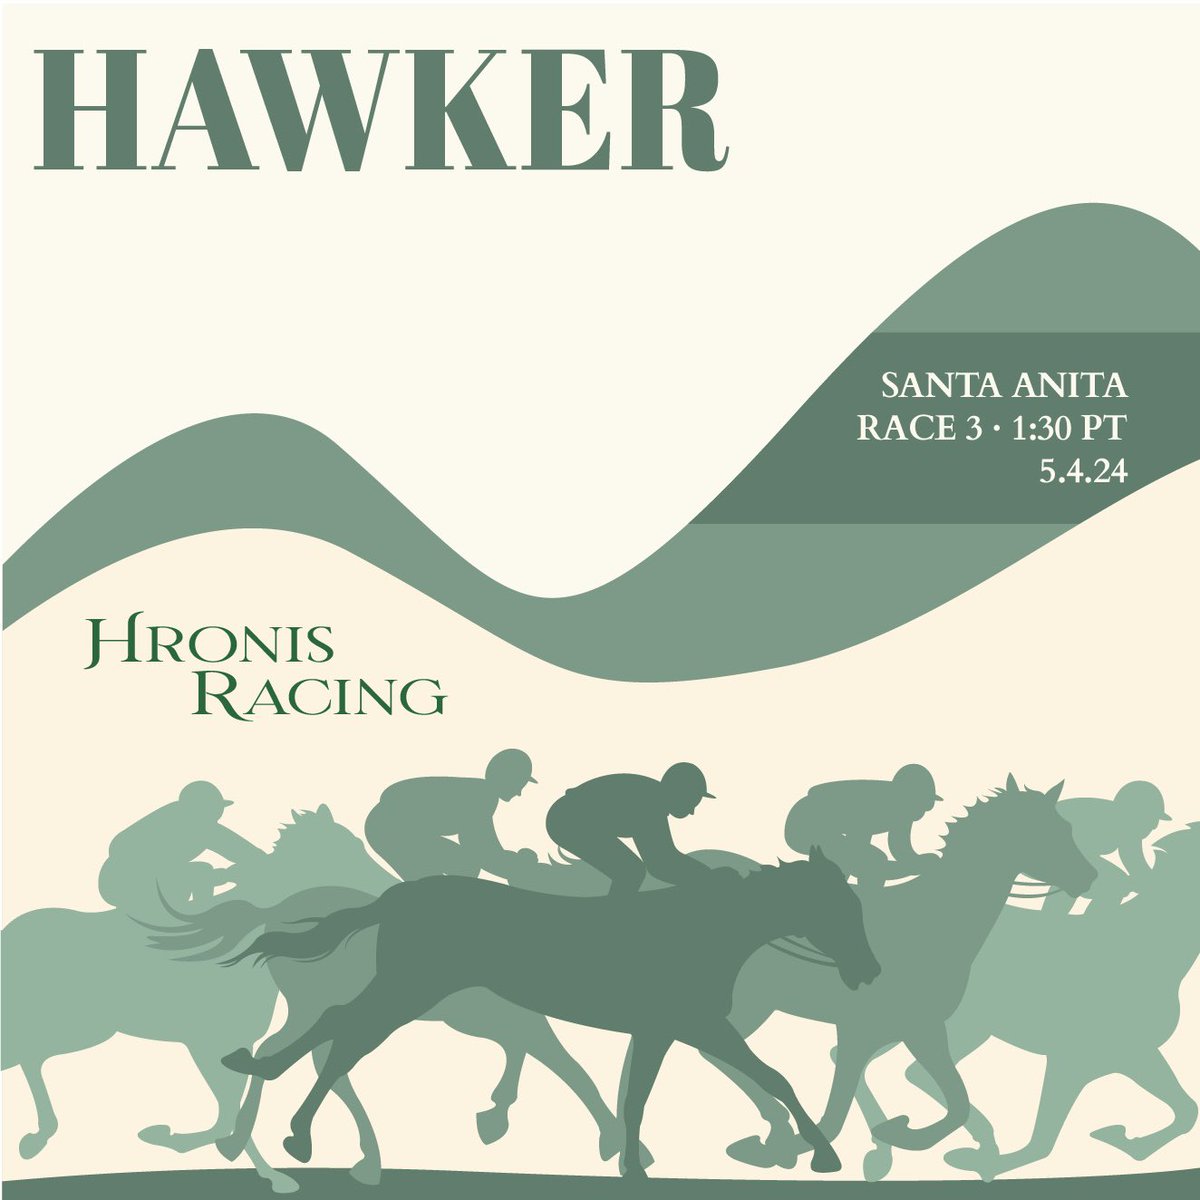 Good luck to Hawker on Saturday in race 3 at @santaanitapark! 🙌🏼